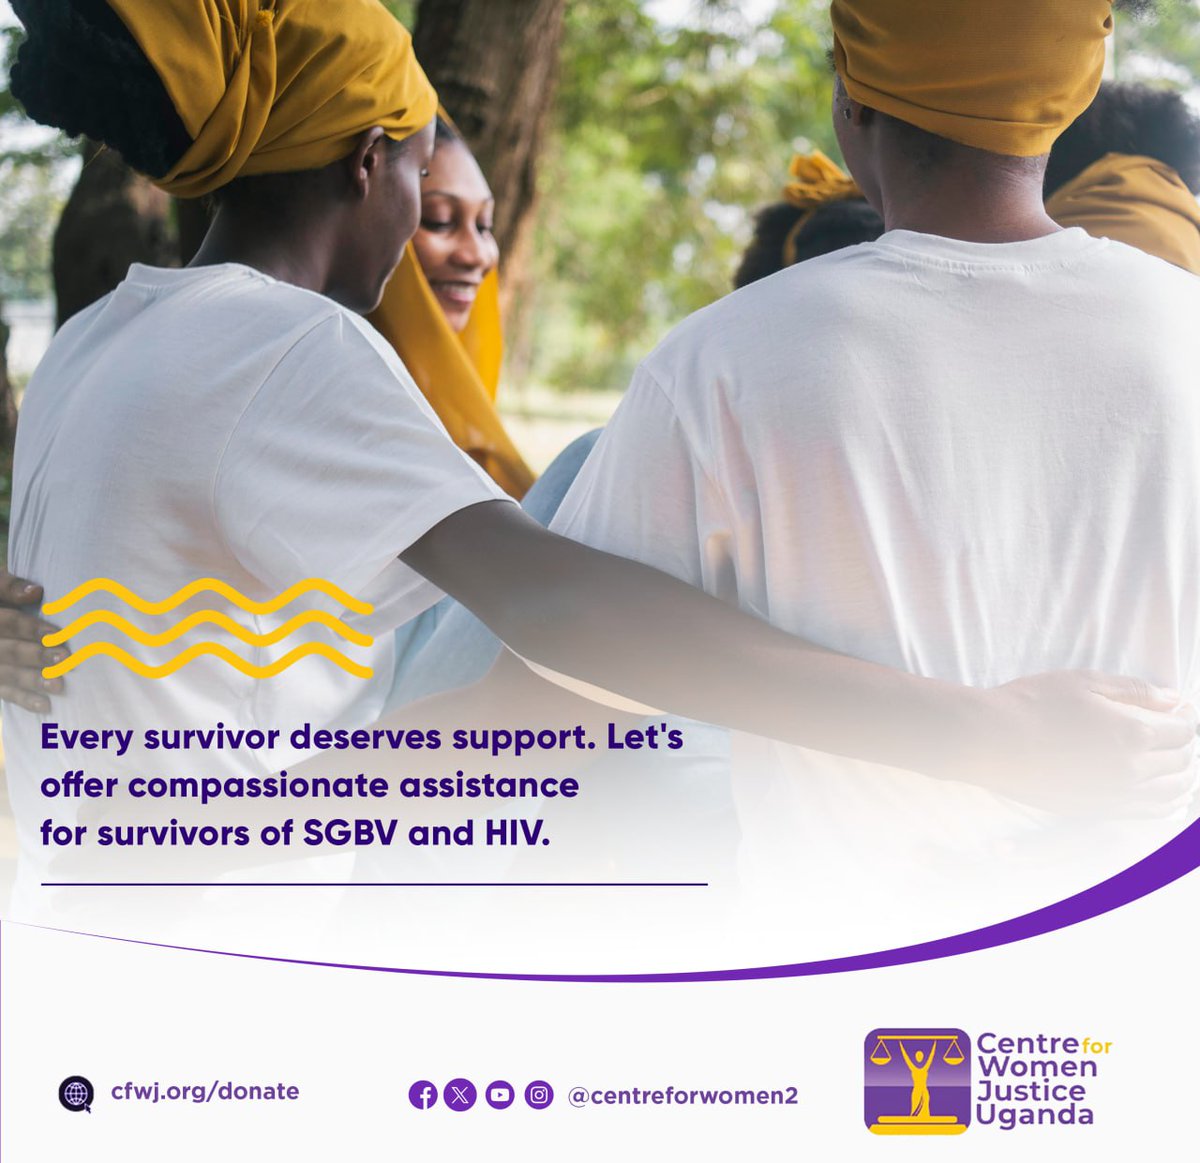 Every sexual and gender based violence survivor deserves support. Don't ostracize them. Include and listen to them. #CentreforWomenJusticeUganda